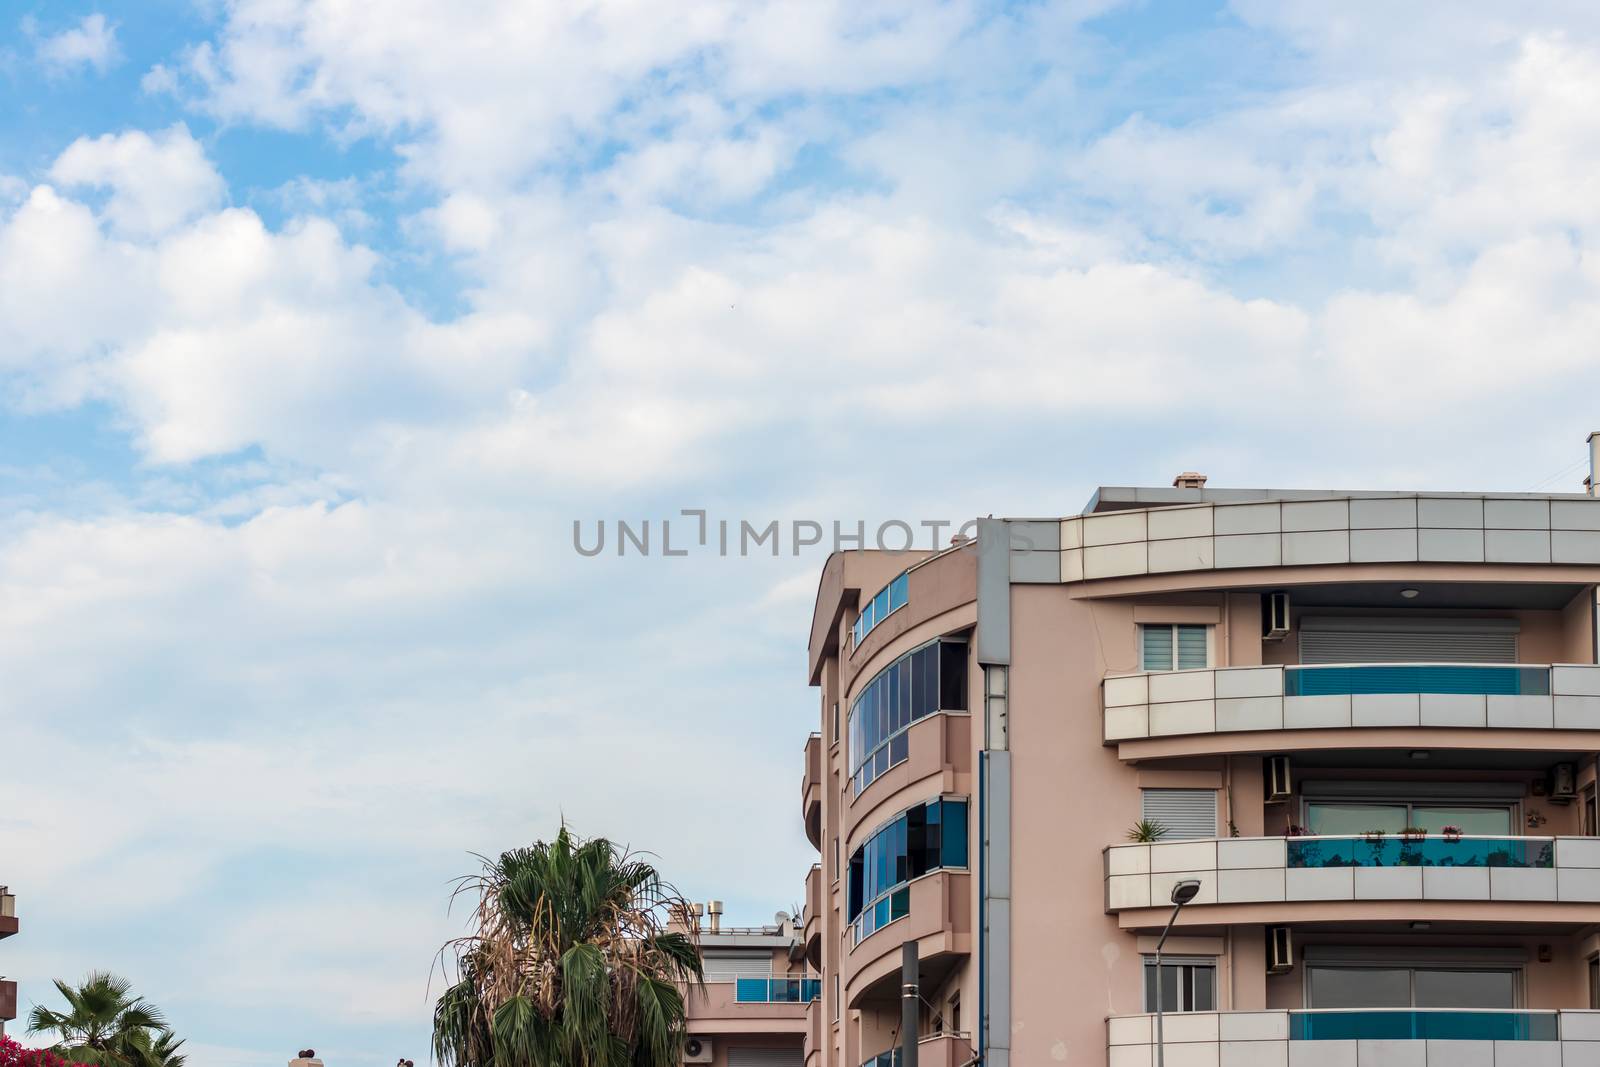 a wide corner shoot from an modern building with balcony - sky landscape as background. photo has taken at izmir/turkey.